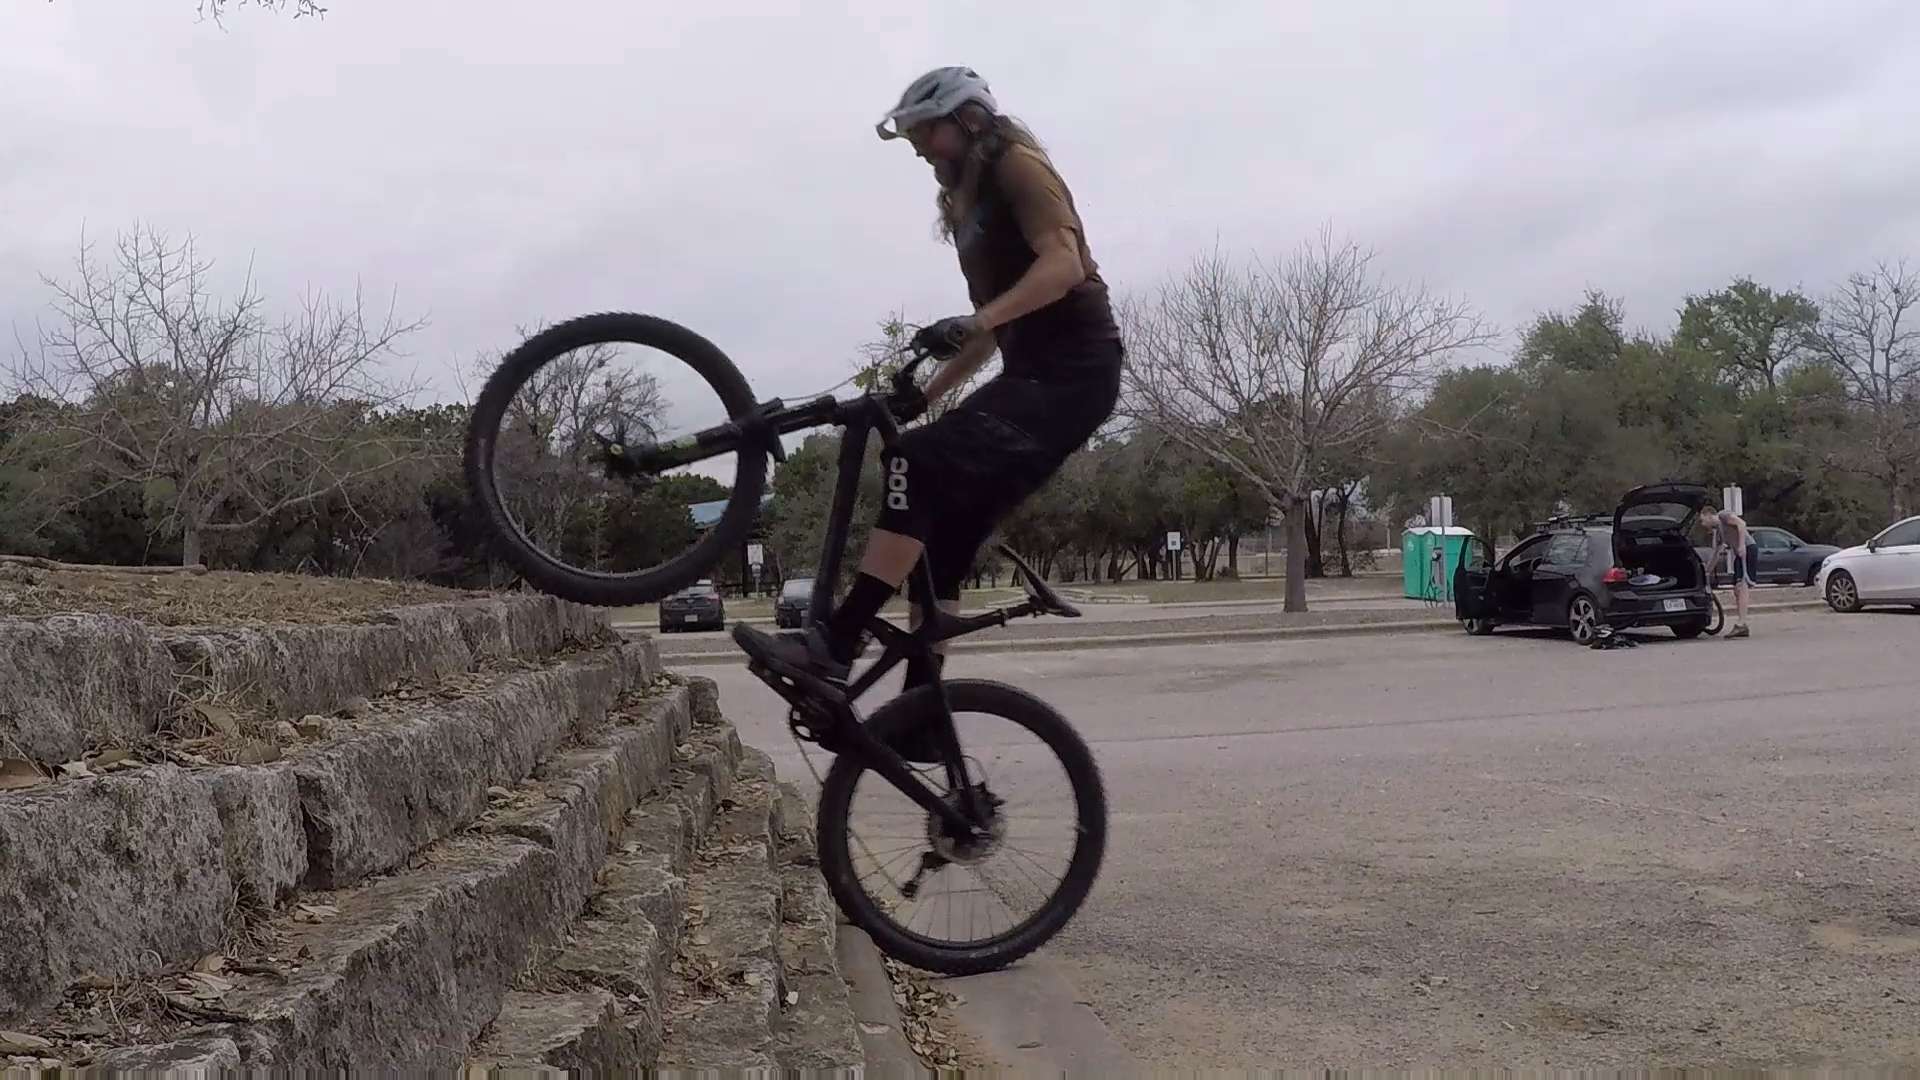 MTB Manual Over Obstacles w/Overlooked Move, Video Tutorial